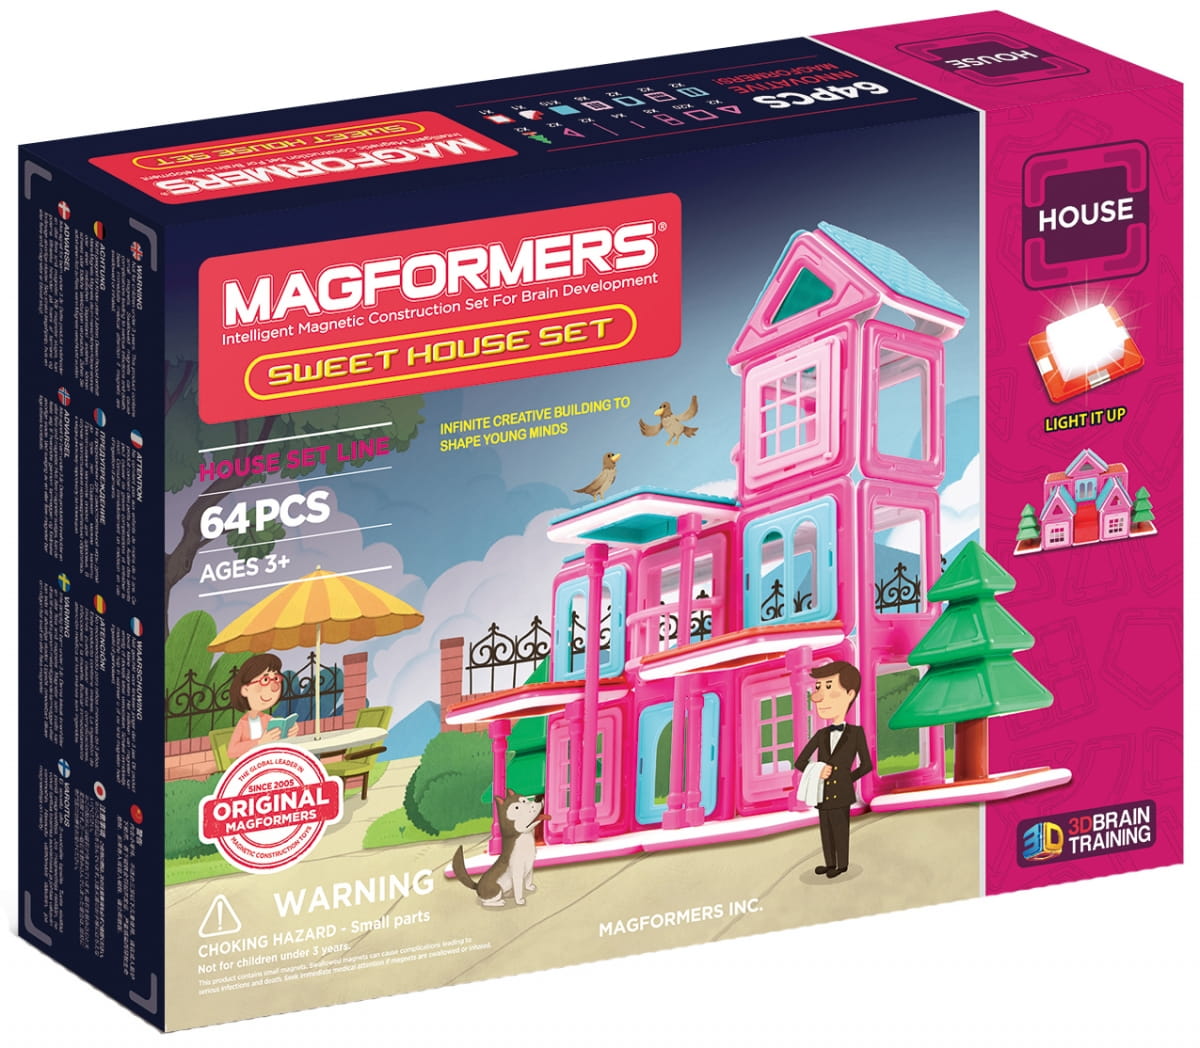    Magformers Sweet House Set (64 )